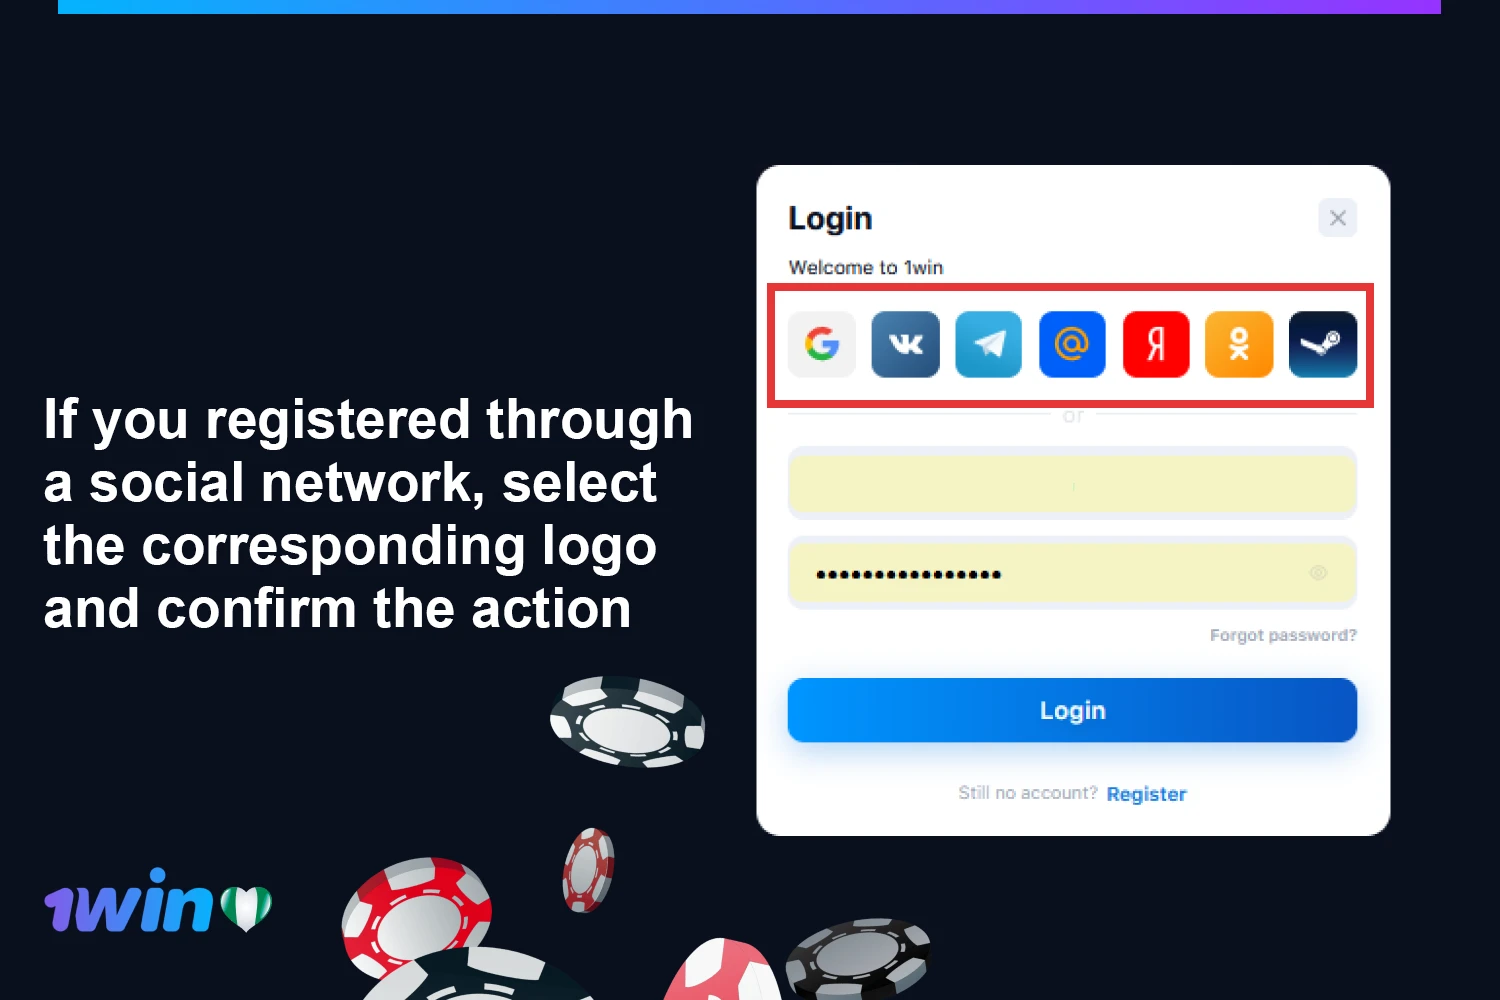 Users from Nigeria can log in to their 1win account via social networks